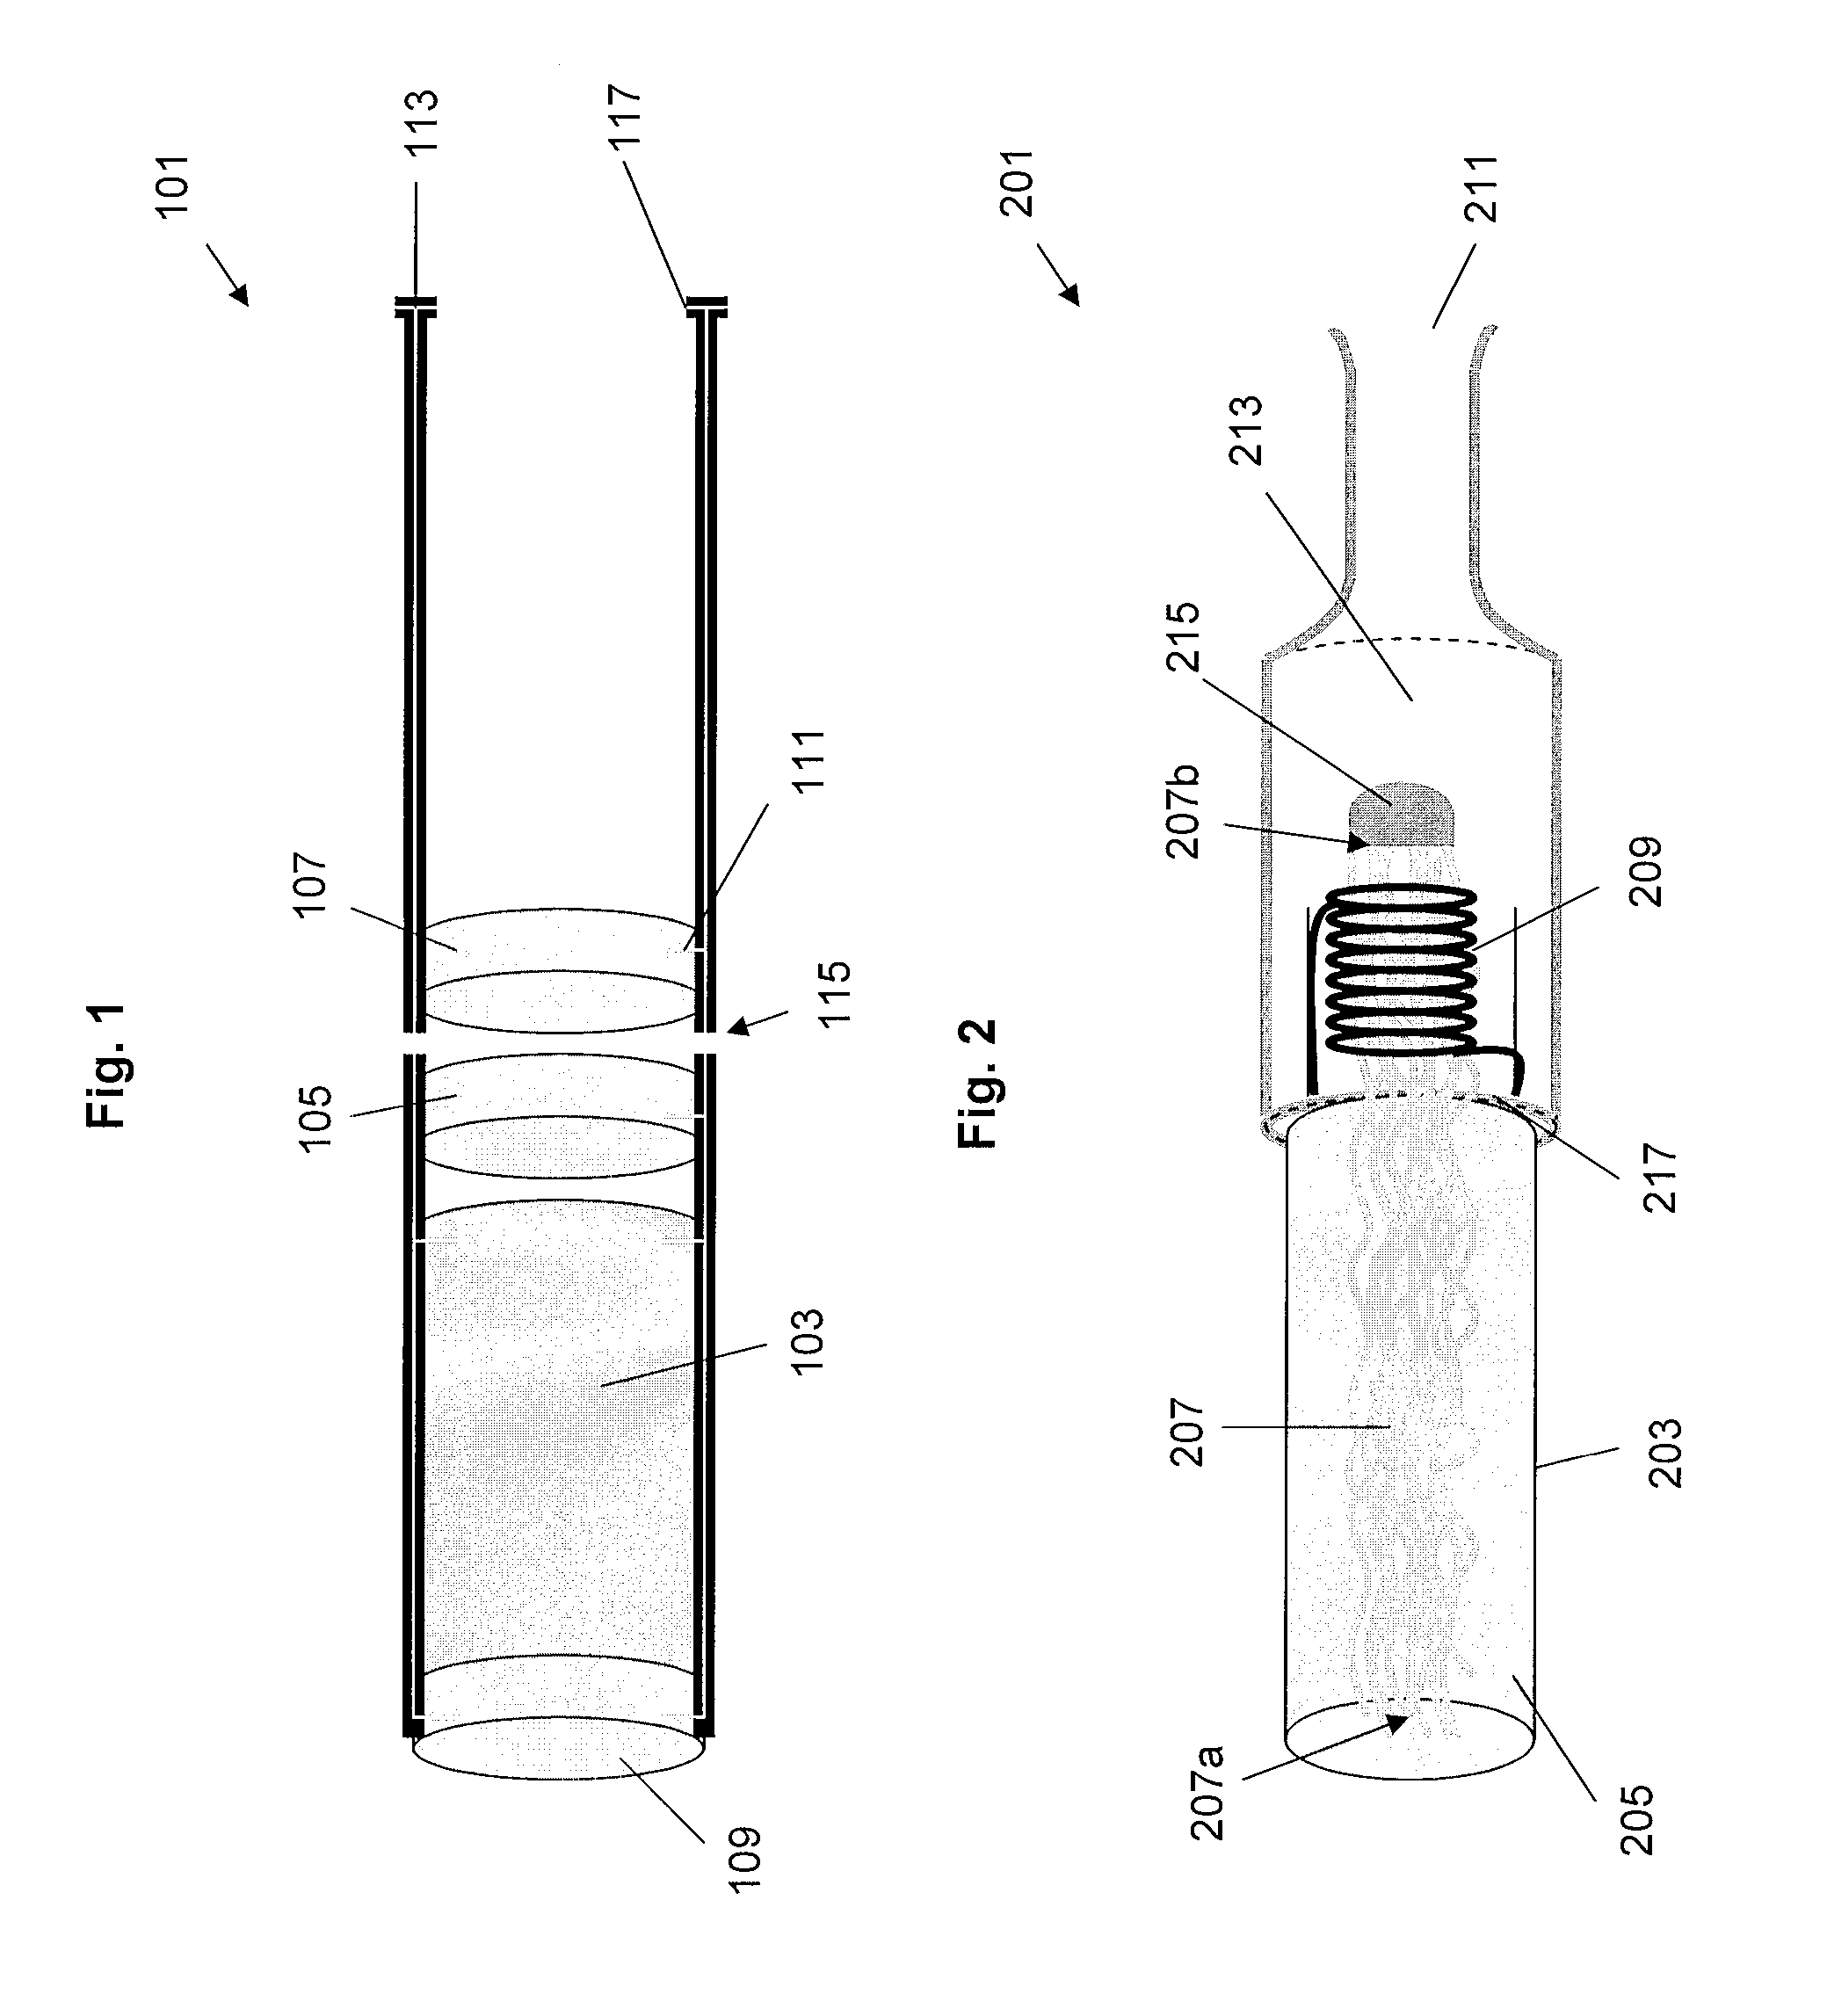 Electrically heated smoking system having a liquid storage portion